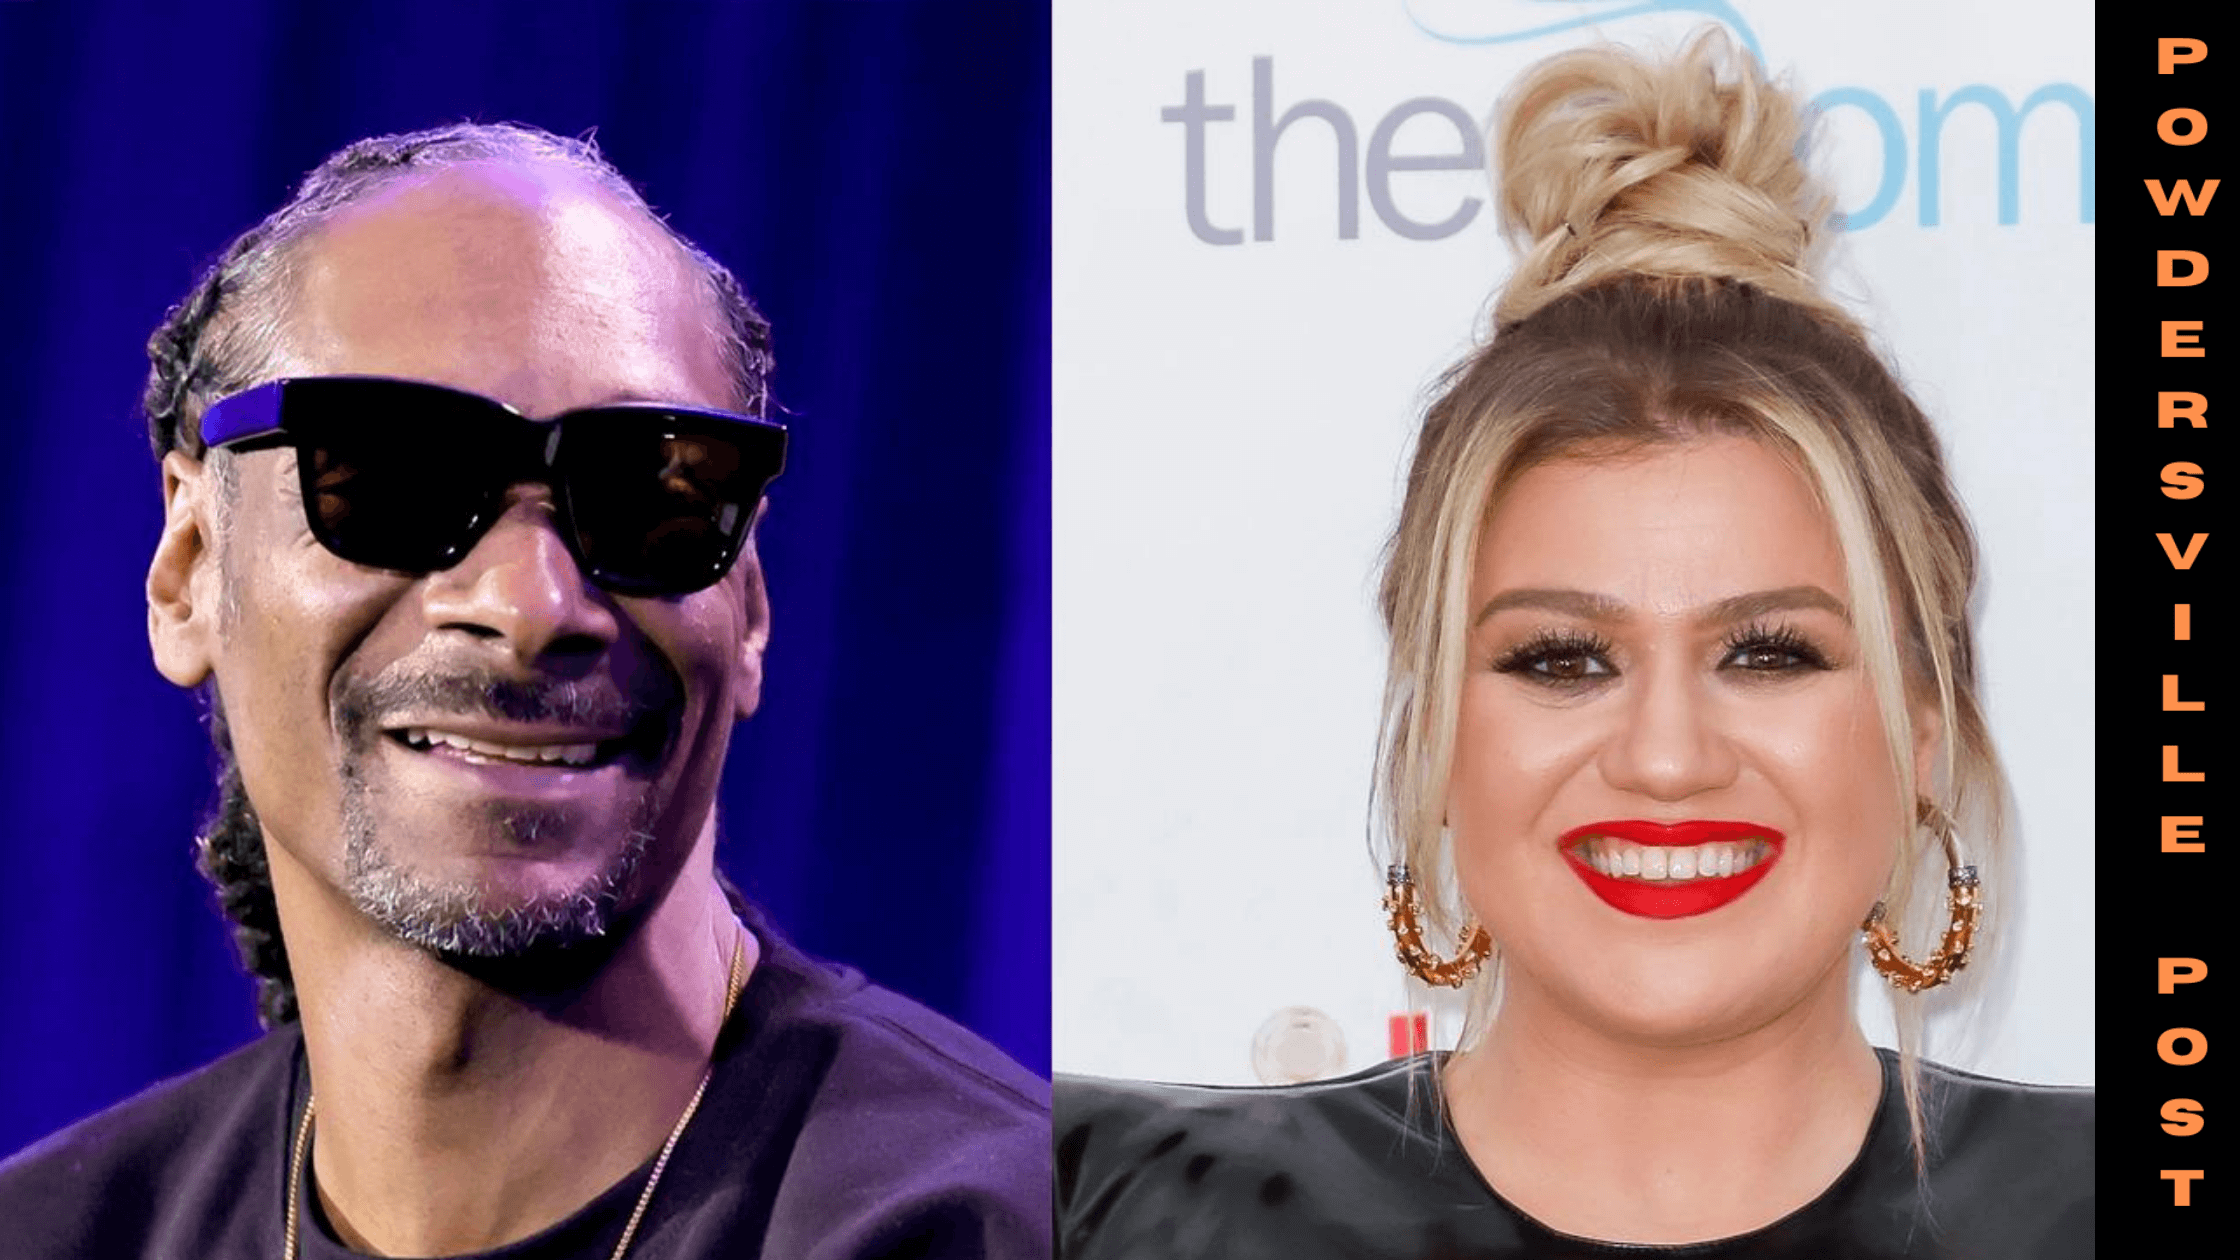 Kelly Clarkson And Snoop Dogg Are Teaming Up Again For 'American Idol' As Host